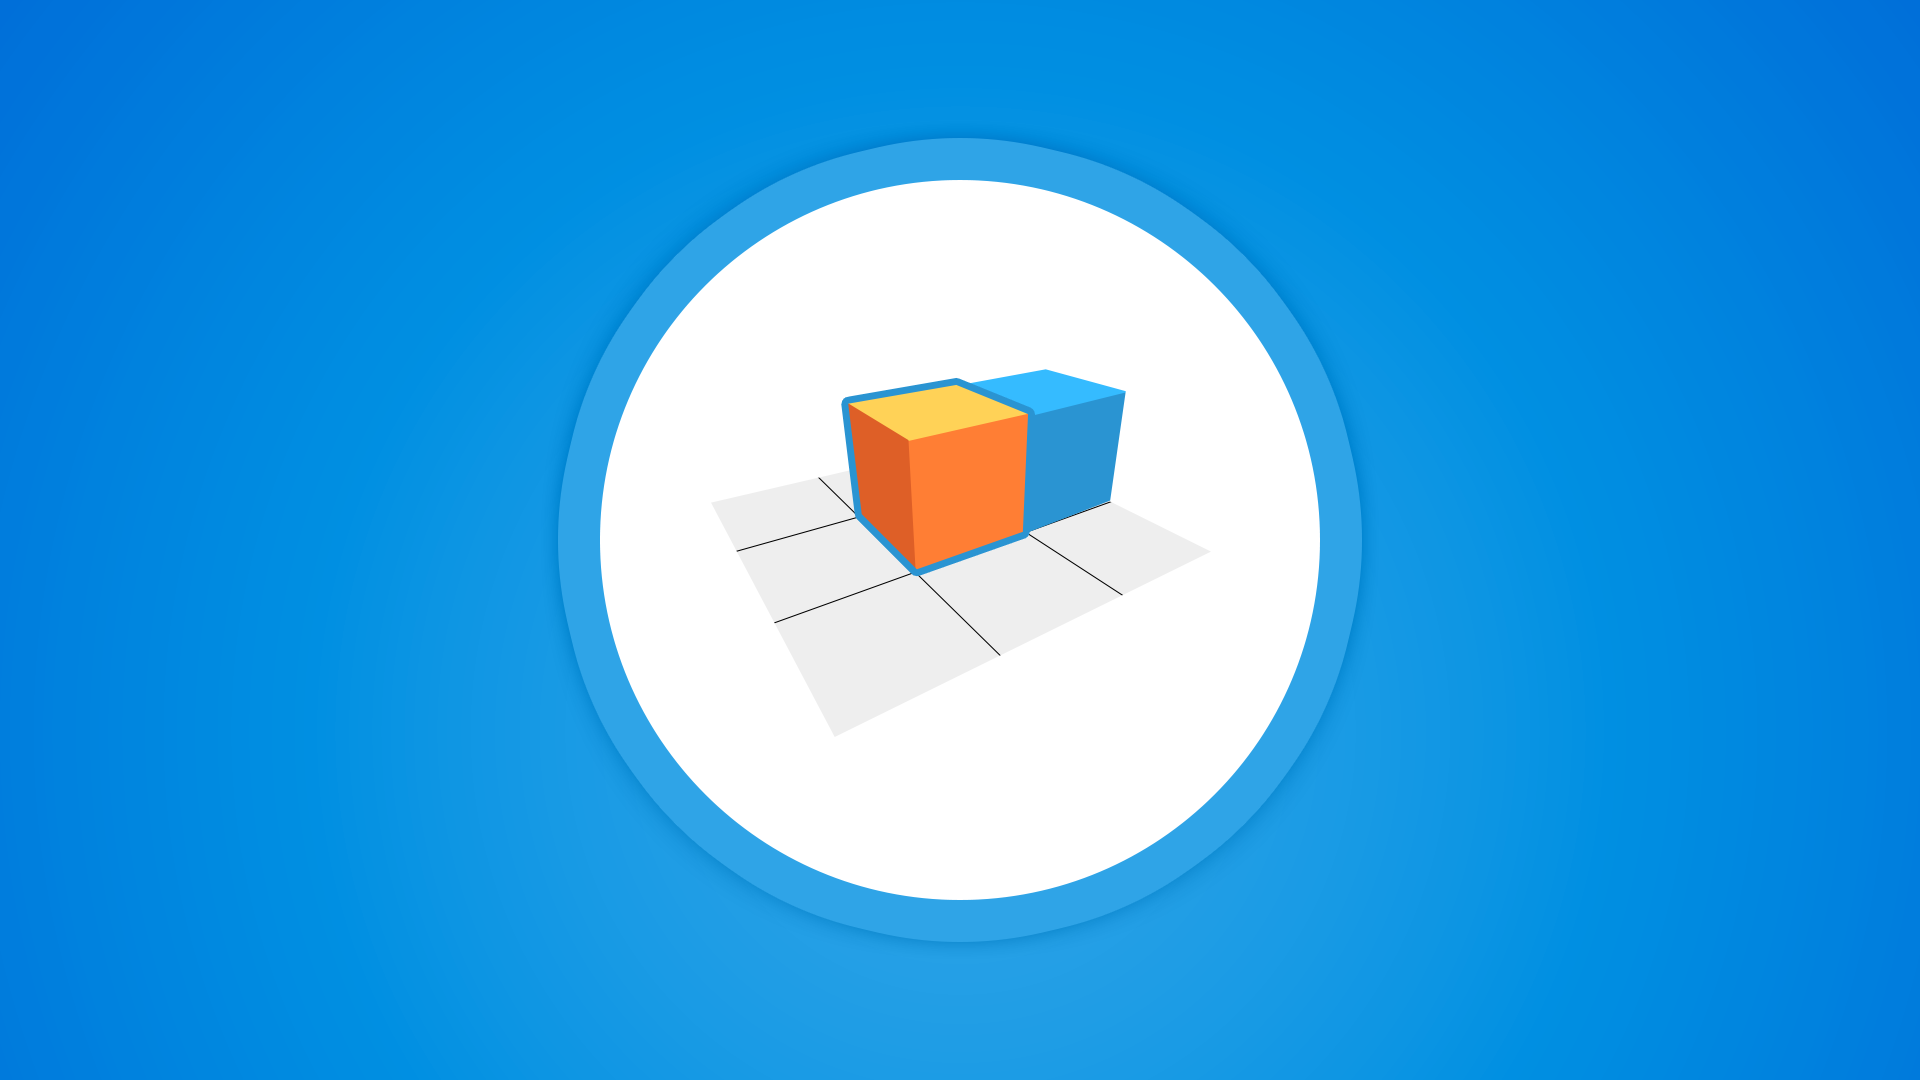 Icon for "Orange Cube" completed